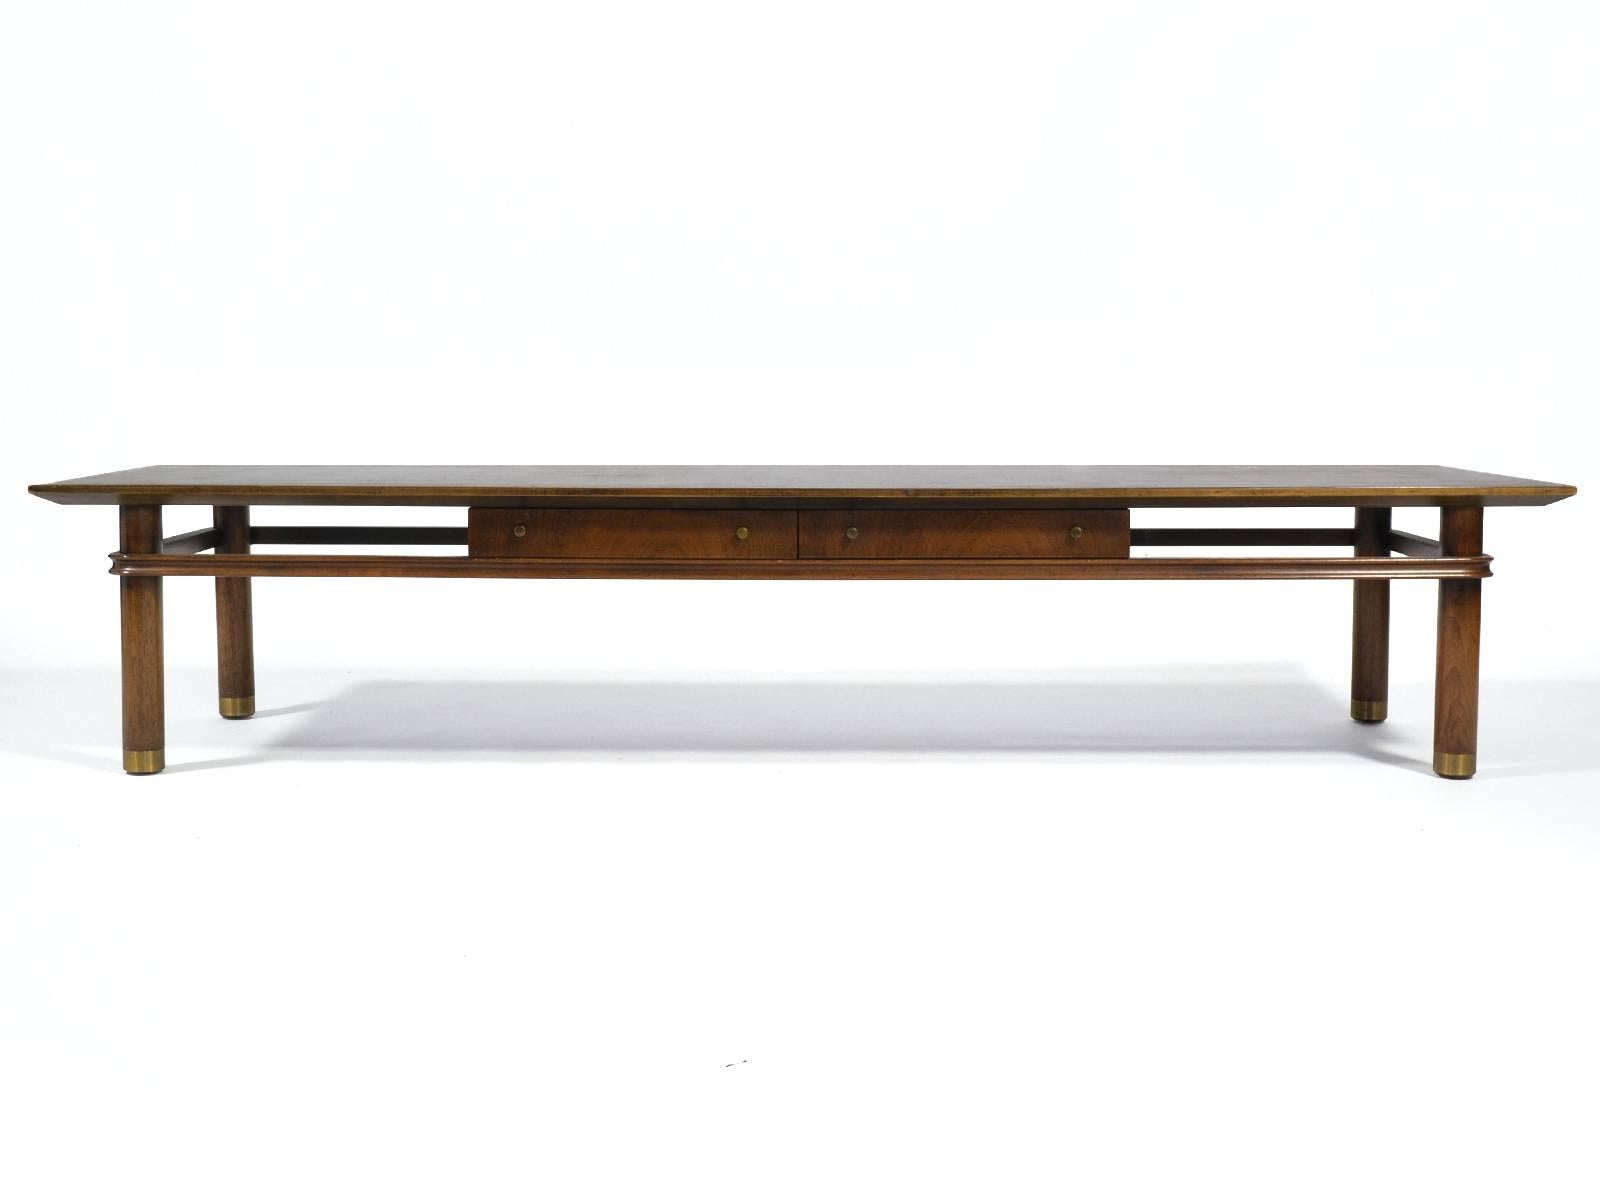 A beautiful design which reflects the refined aesthetic of Bert England and the quality construction of Johnson Furniture. This long, low piece can serve equally well as a coffee table or a bench. It features two shallow drawers a sculpted